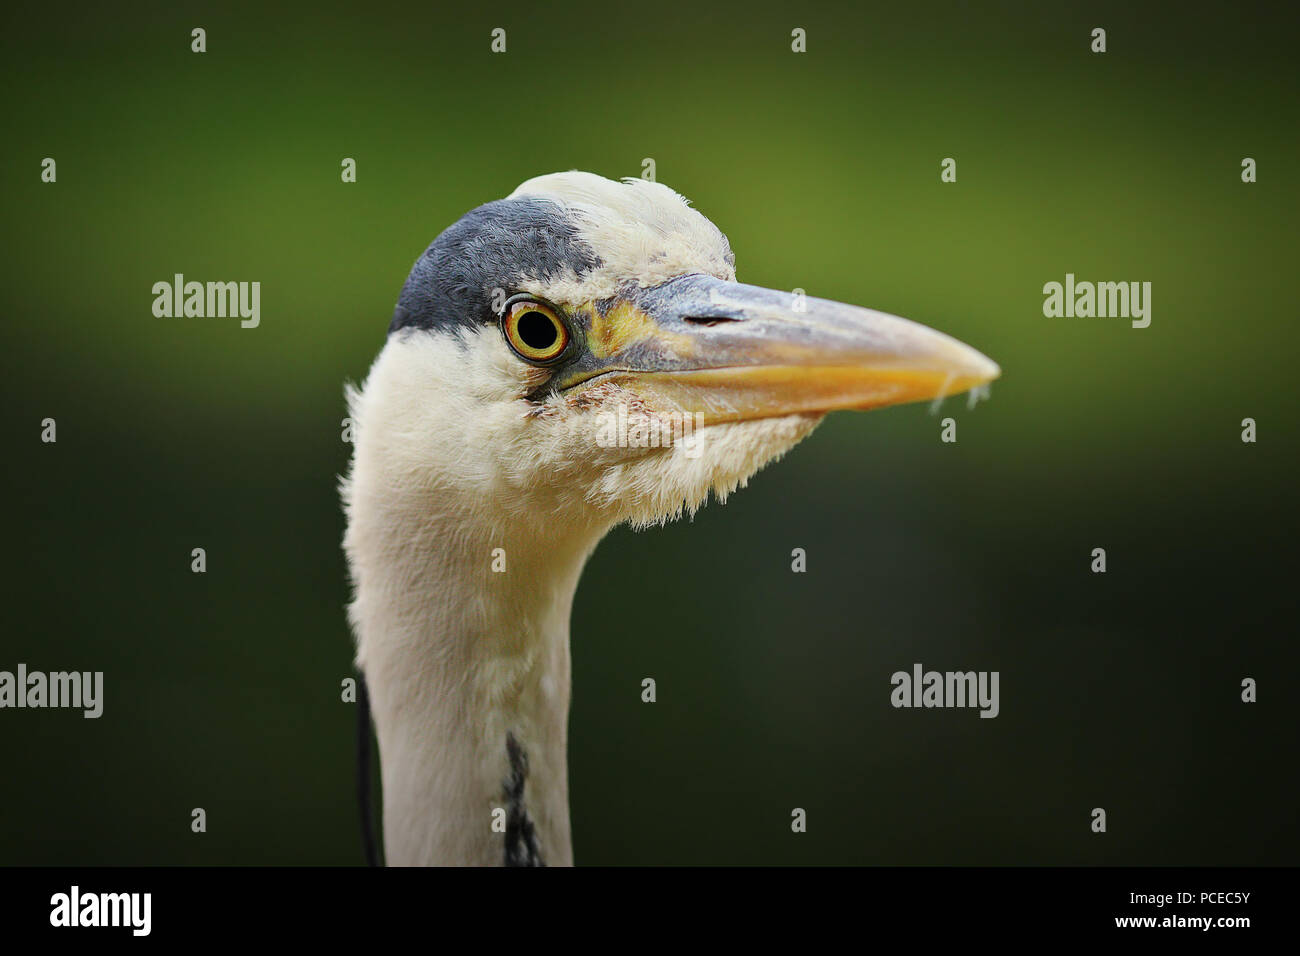 grey heron head over green out of focus background ( Ardea cinerea ) Stock Photo